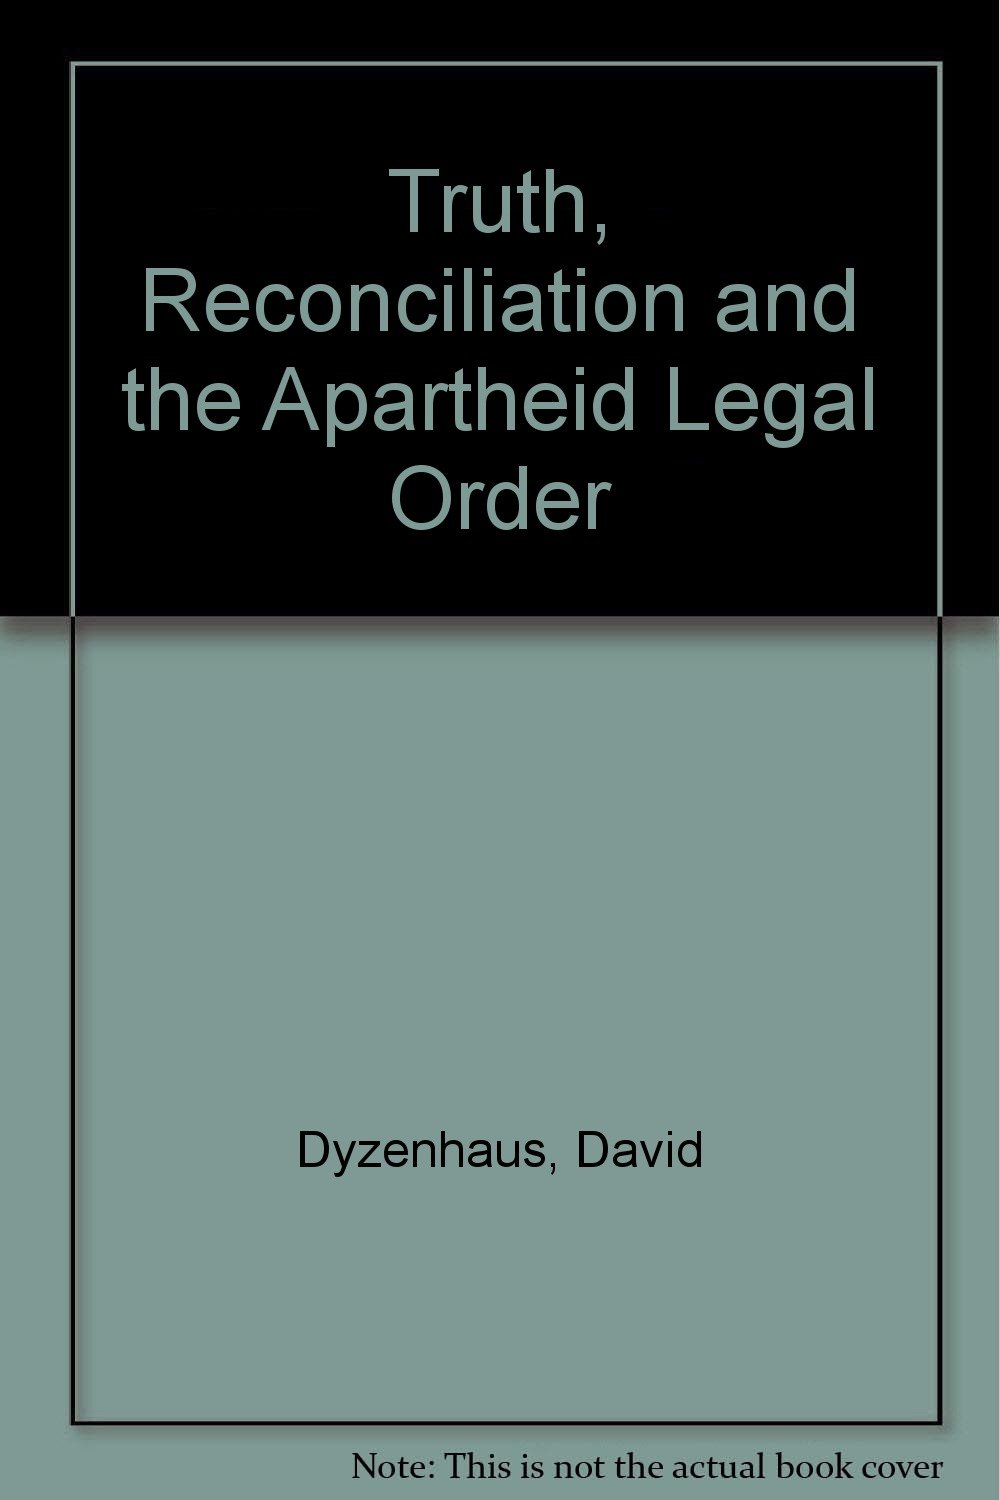 Truth, Reconciliation and the Apartheid Legal Order